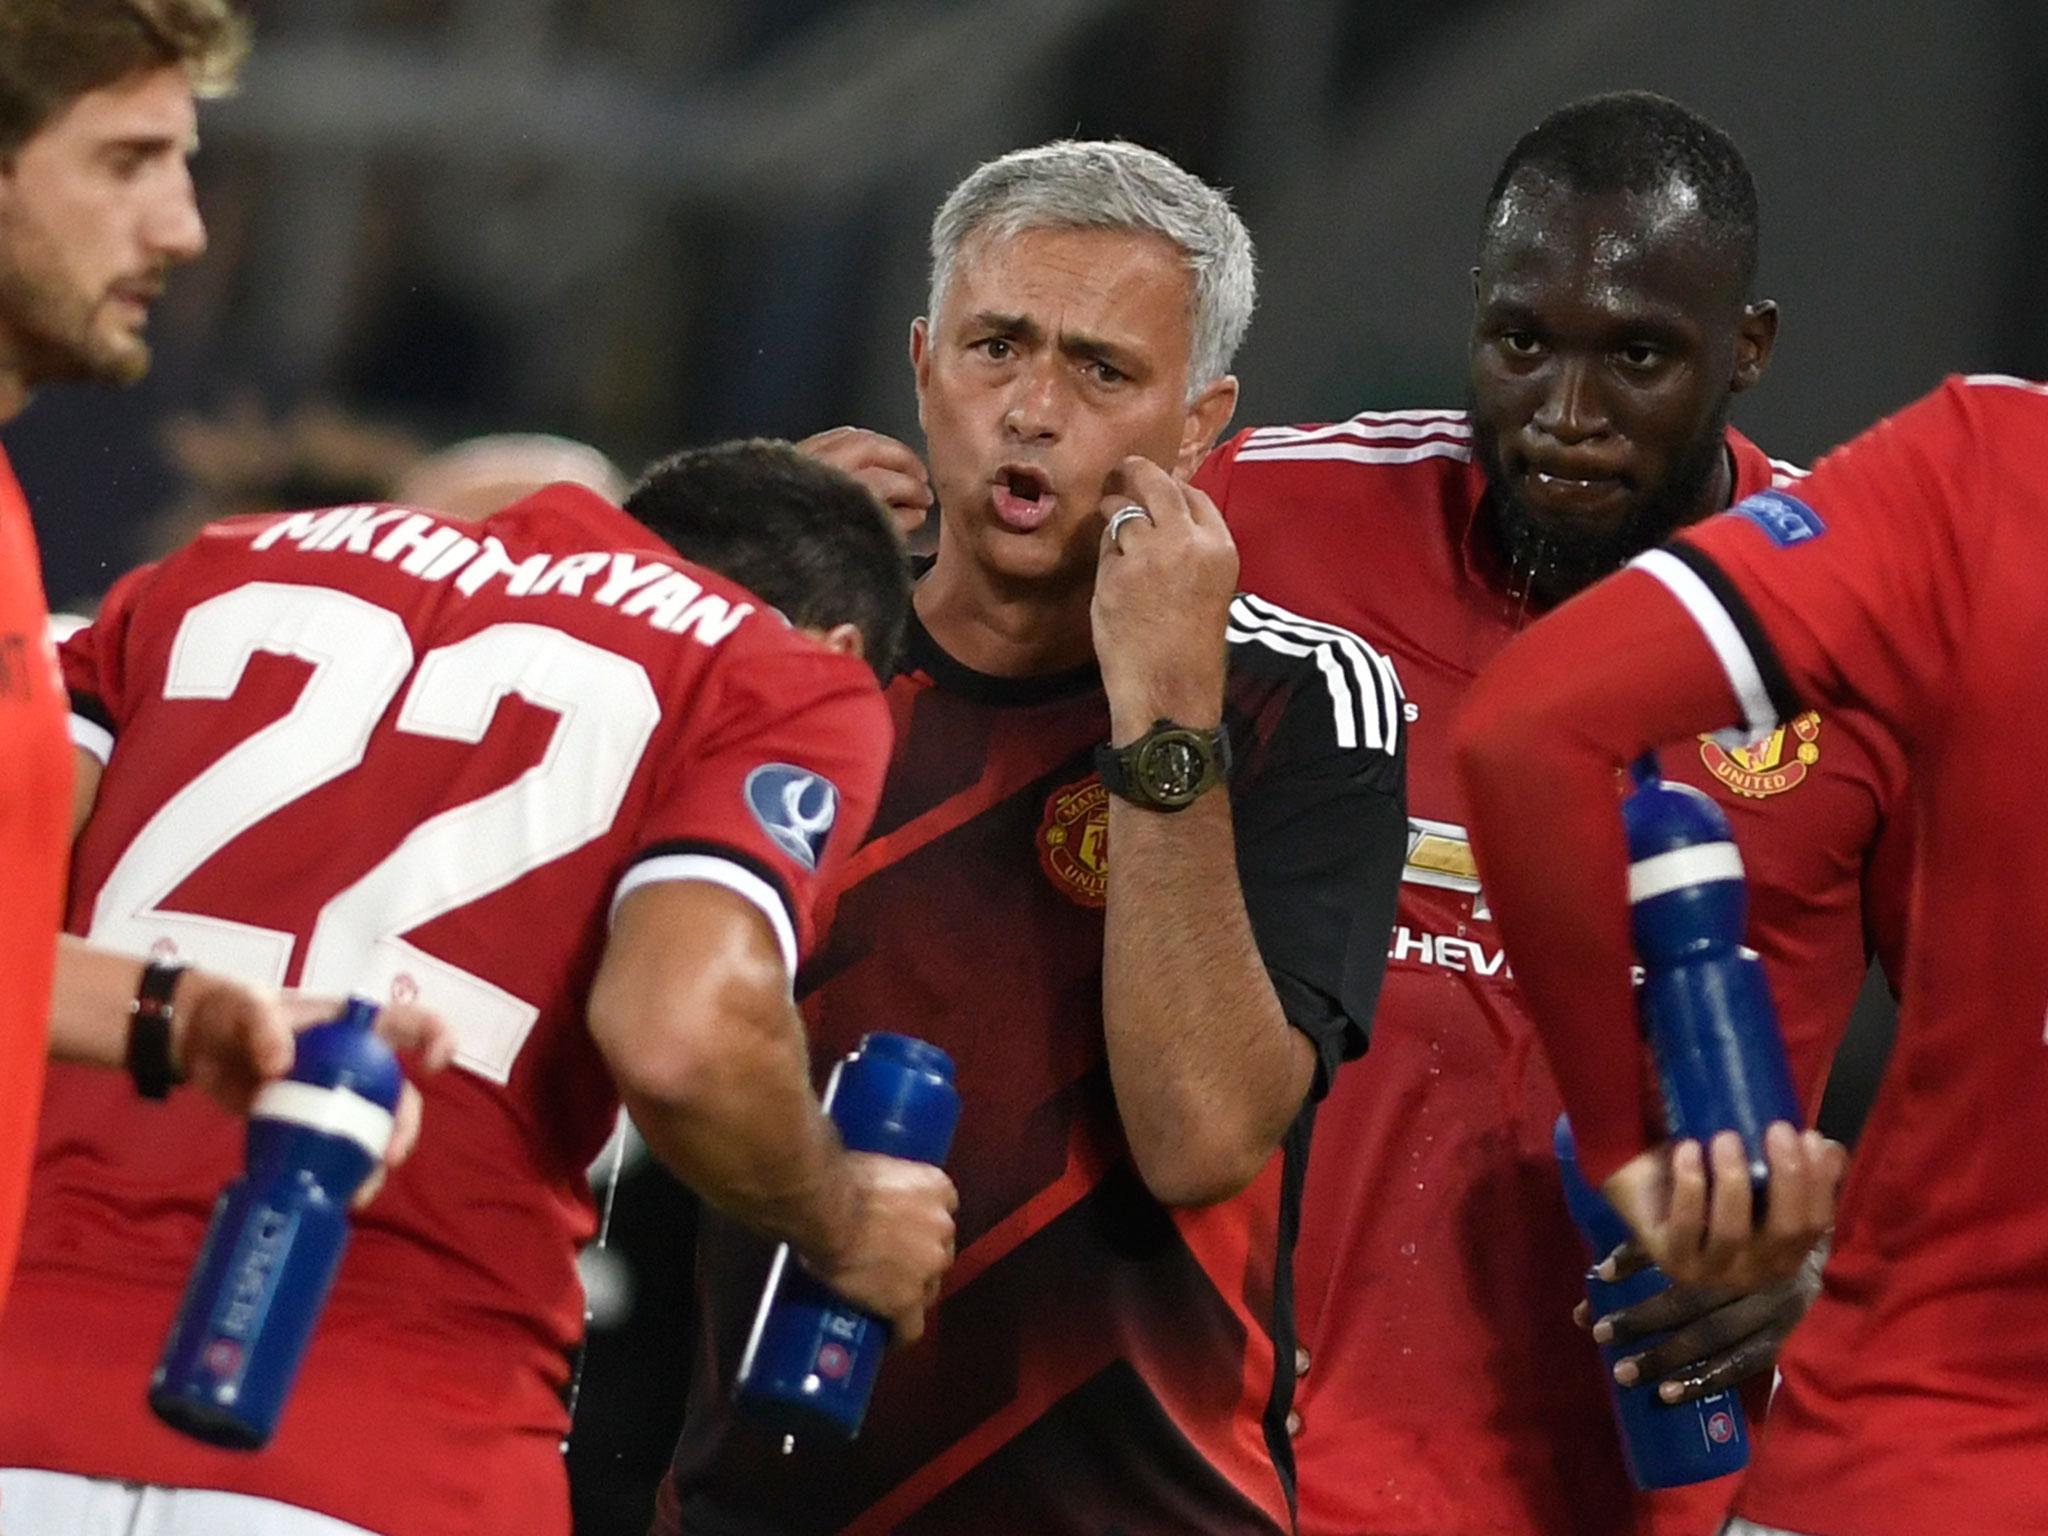 Jose Mourinho still has much work to do at Manchester United